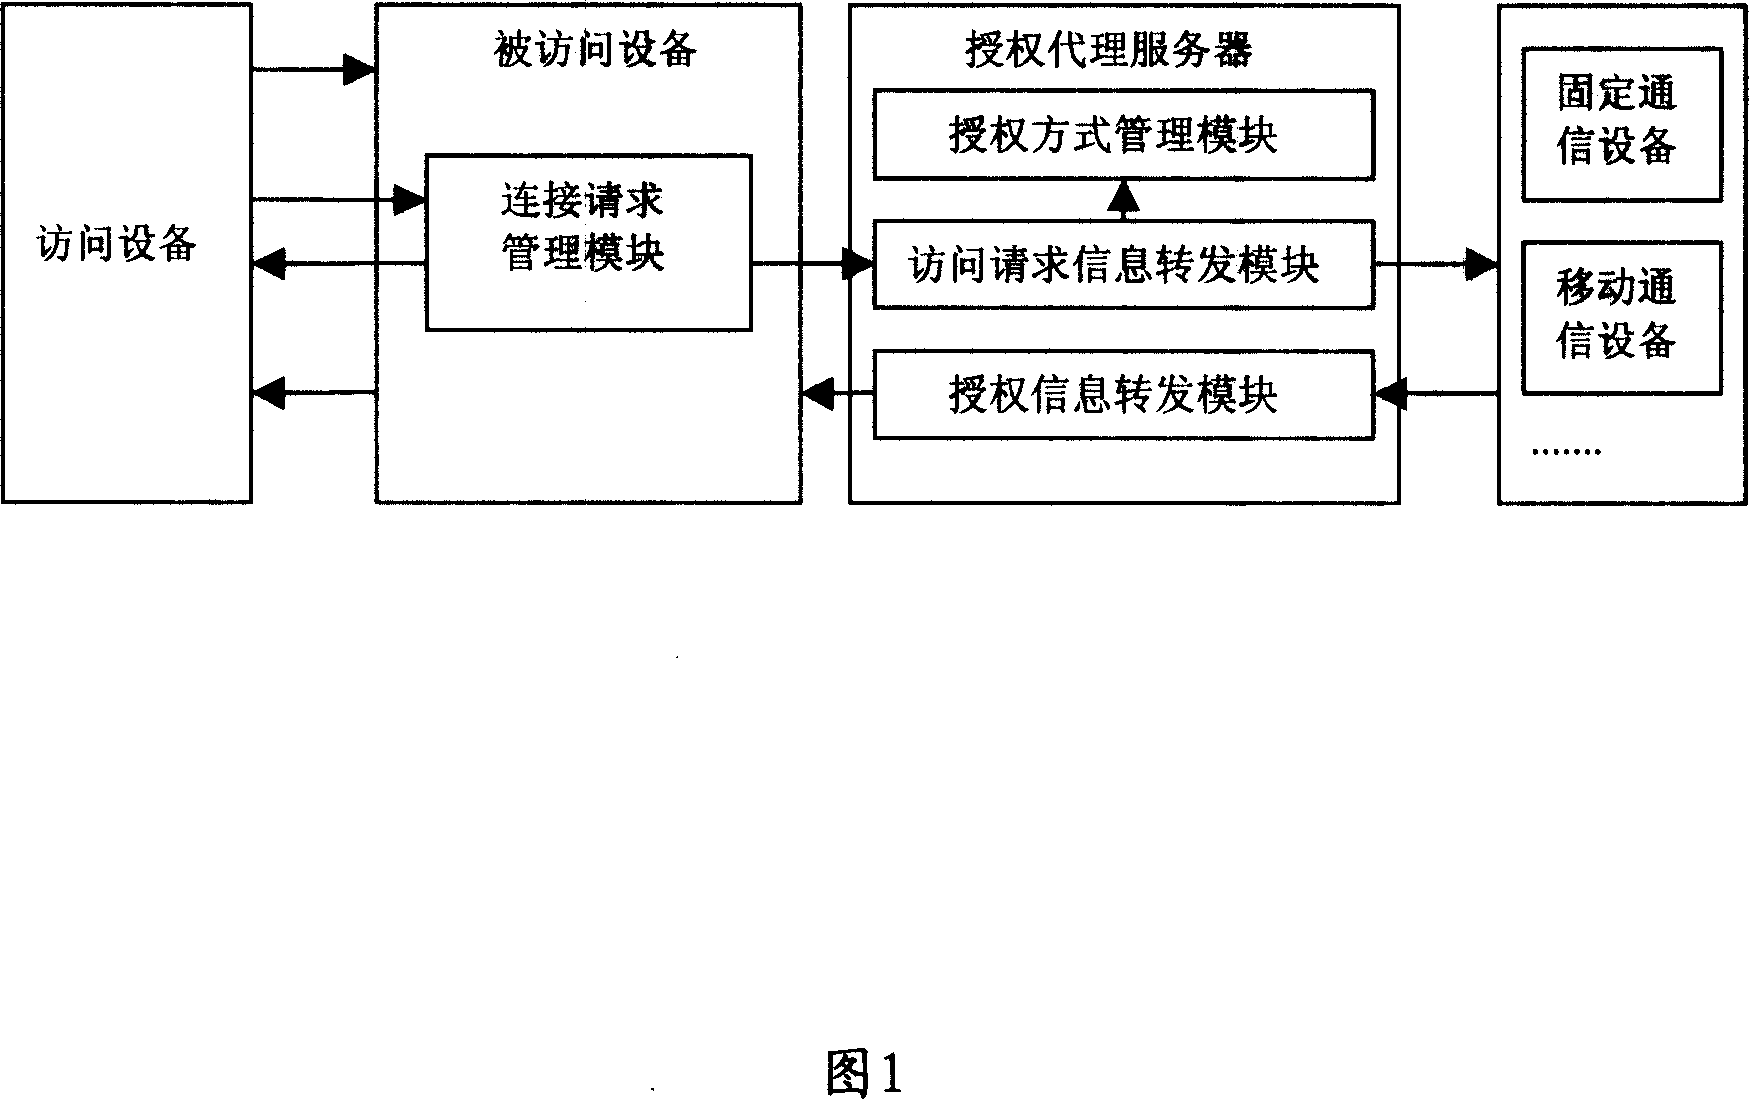 A system and method for authorizing access request